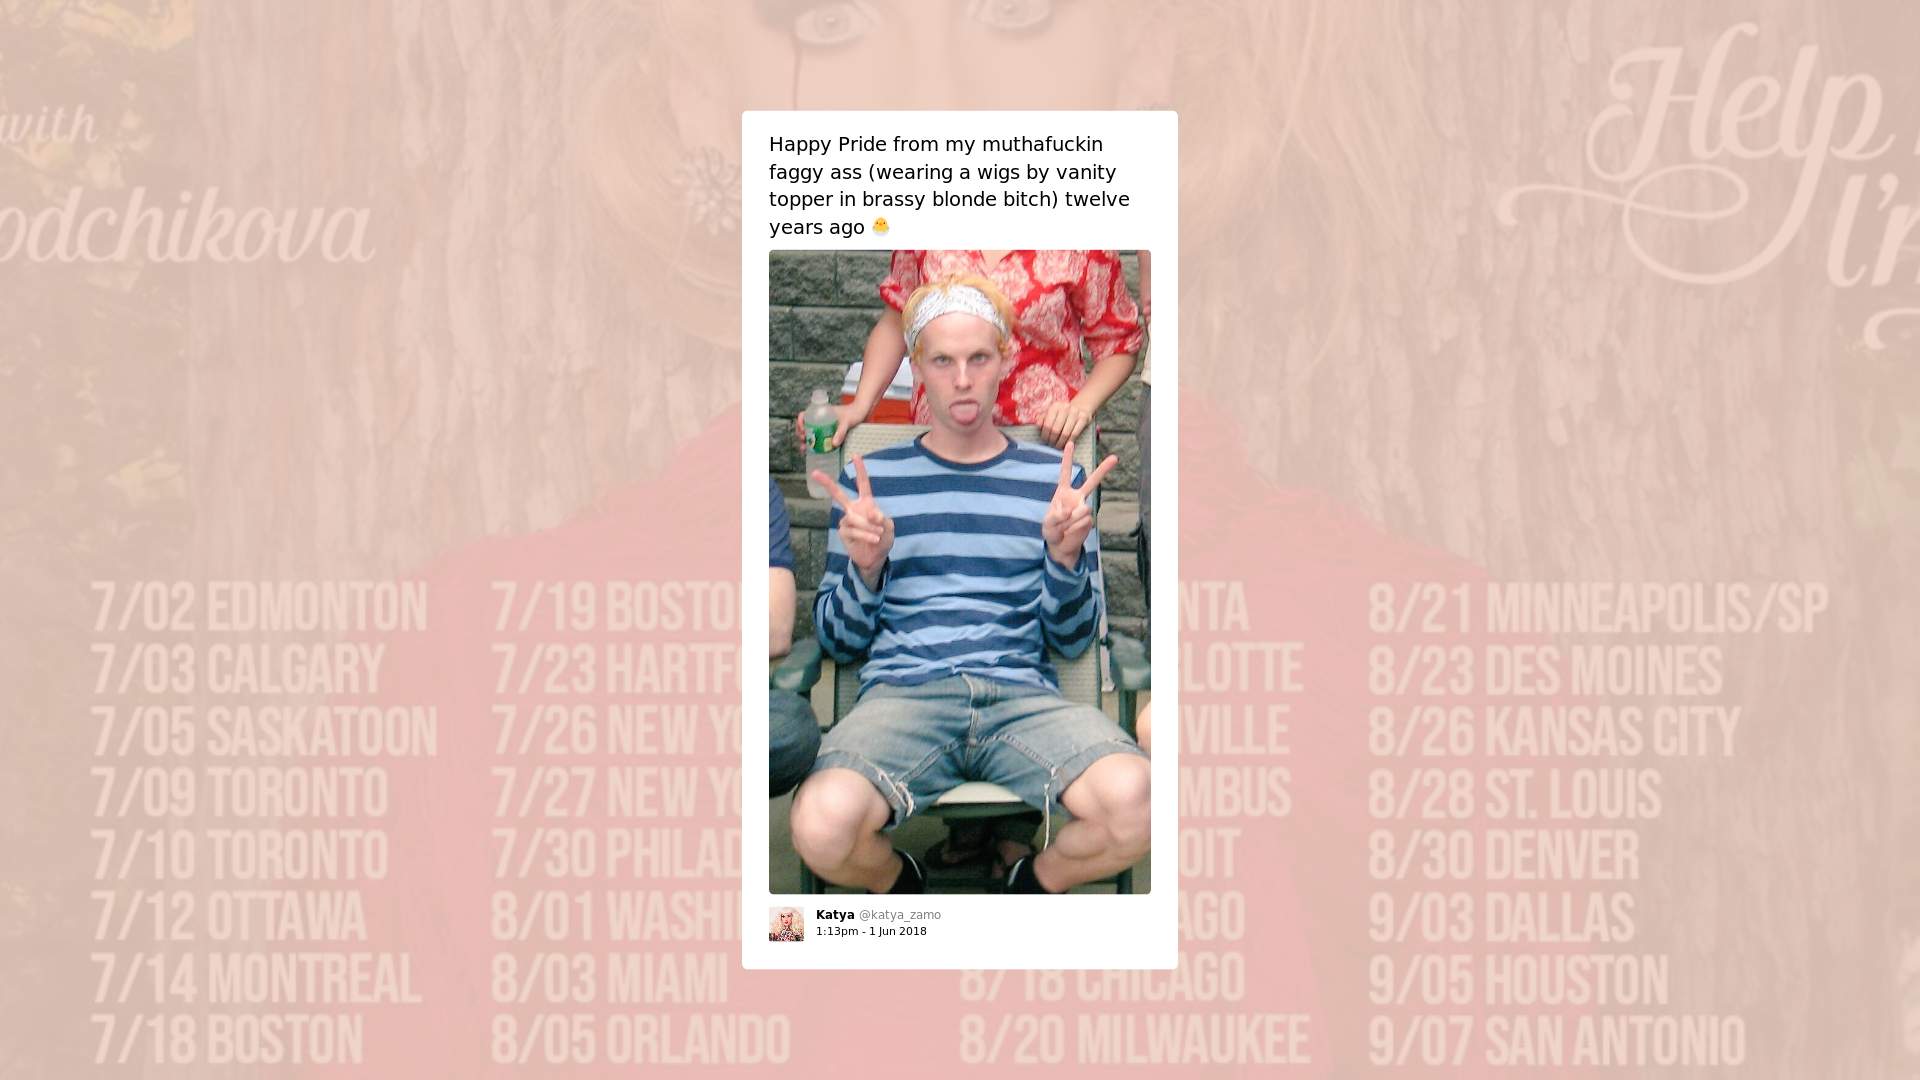 Print screen of a post by Katya Zamo with a picture and the caption: Happy Pride from my muthafuckin faggy ass (waring a wigs by vanity topper in brassy blonde bitch) twelve years ago.